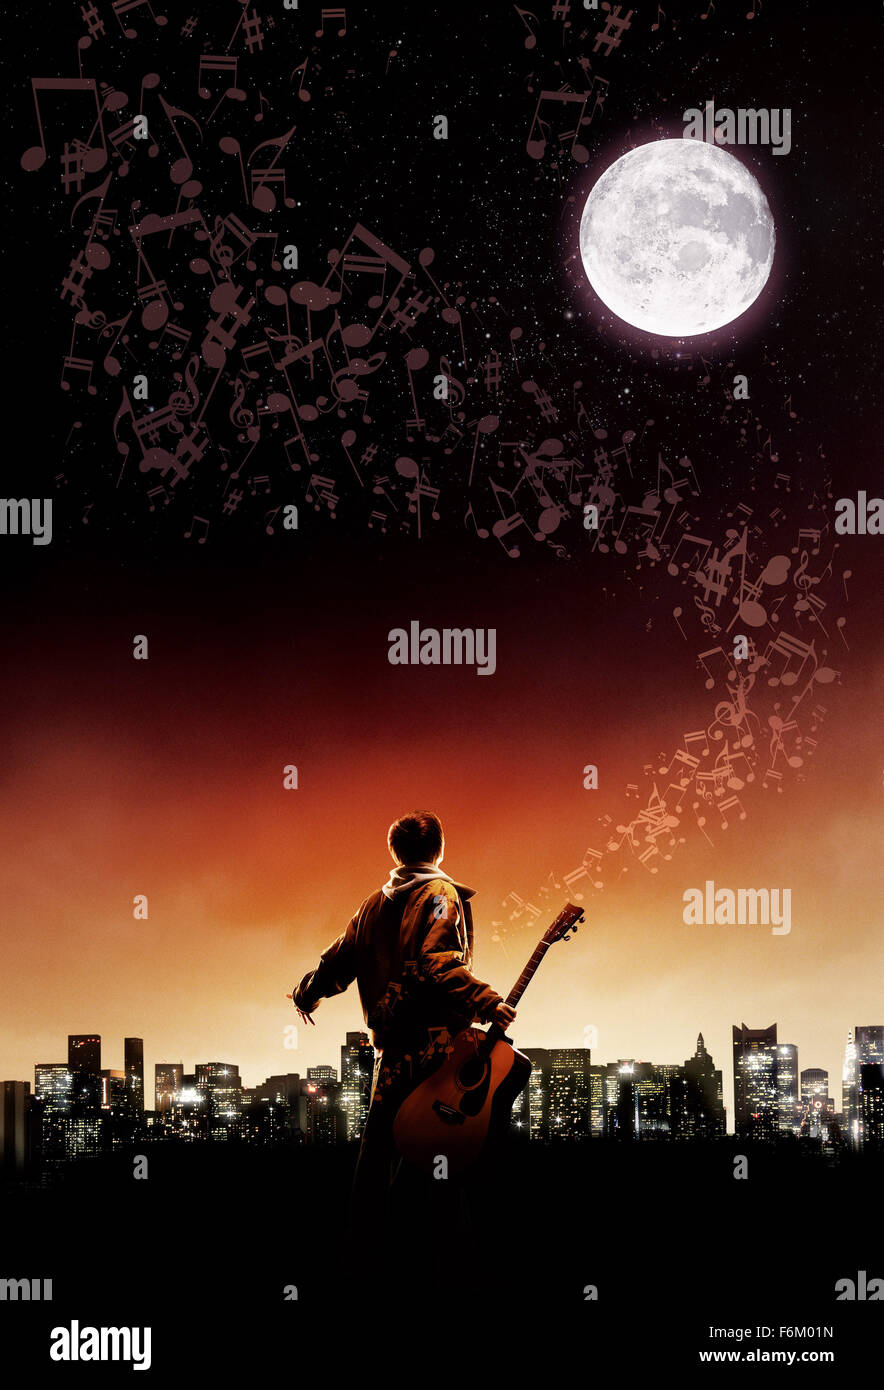 RELEASE DATE: Oct 21, 2007. MOVIE TITLE: August Rush. STUDIO: CJ Entertainment. PLOT: The story of a charismatic young Irish guitarist and a sheltered young cellist who have a chance encounter one magical night above New York's Washington Square, but are soon torn apart, leaving in their wake an infant, August Rush, orphaned by circumstance. Now performing on the streets of New York and cared for by a mysterious stranger, August uses his remarkable musical talent to seek the parents from whom he was separated at birth. PICTURED: Movie Art. Stock Photo